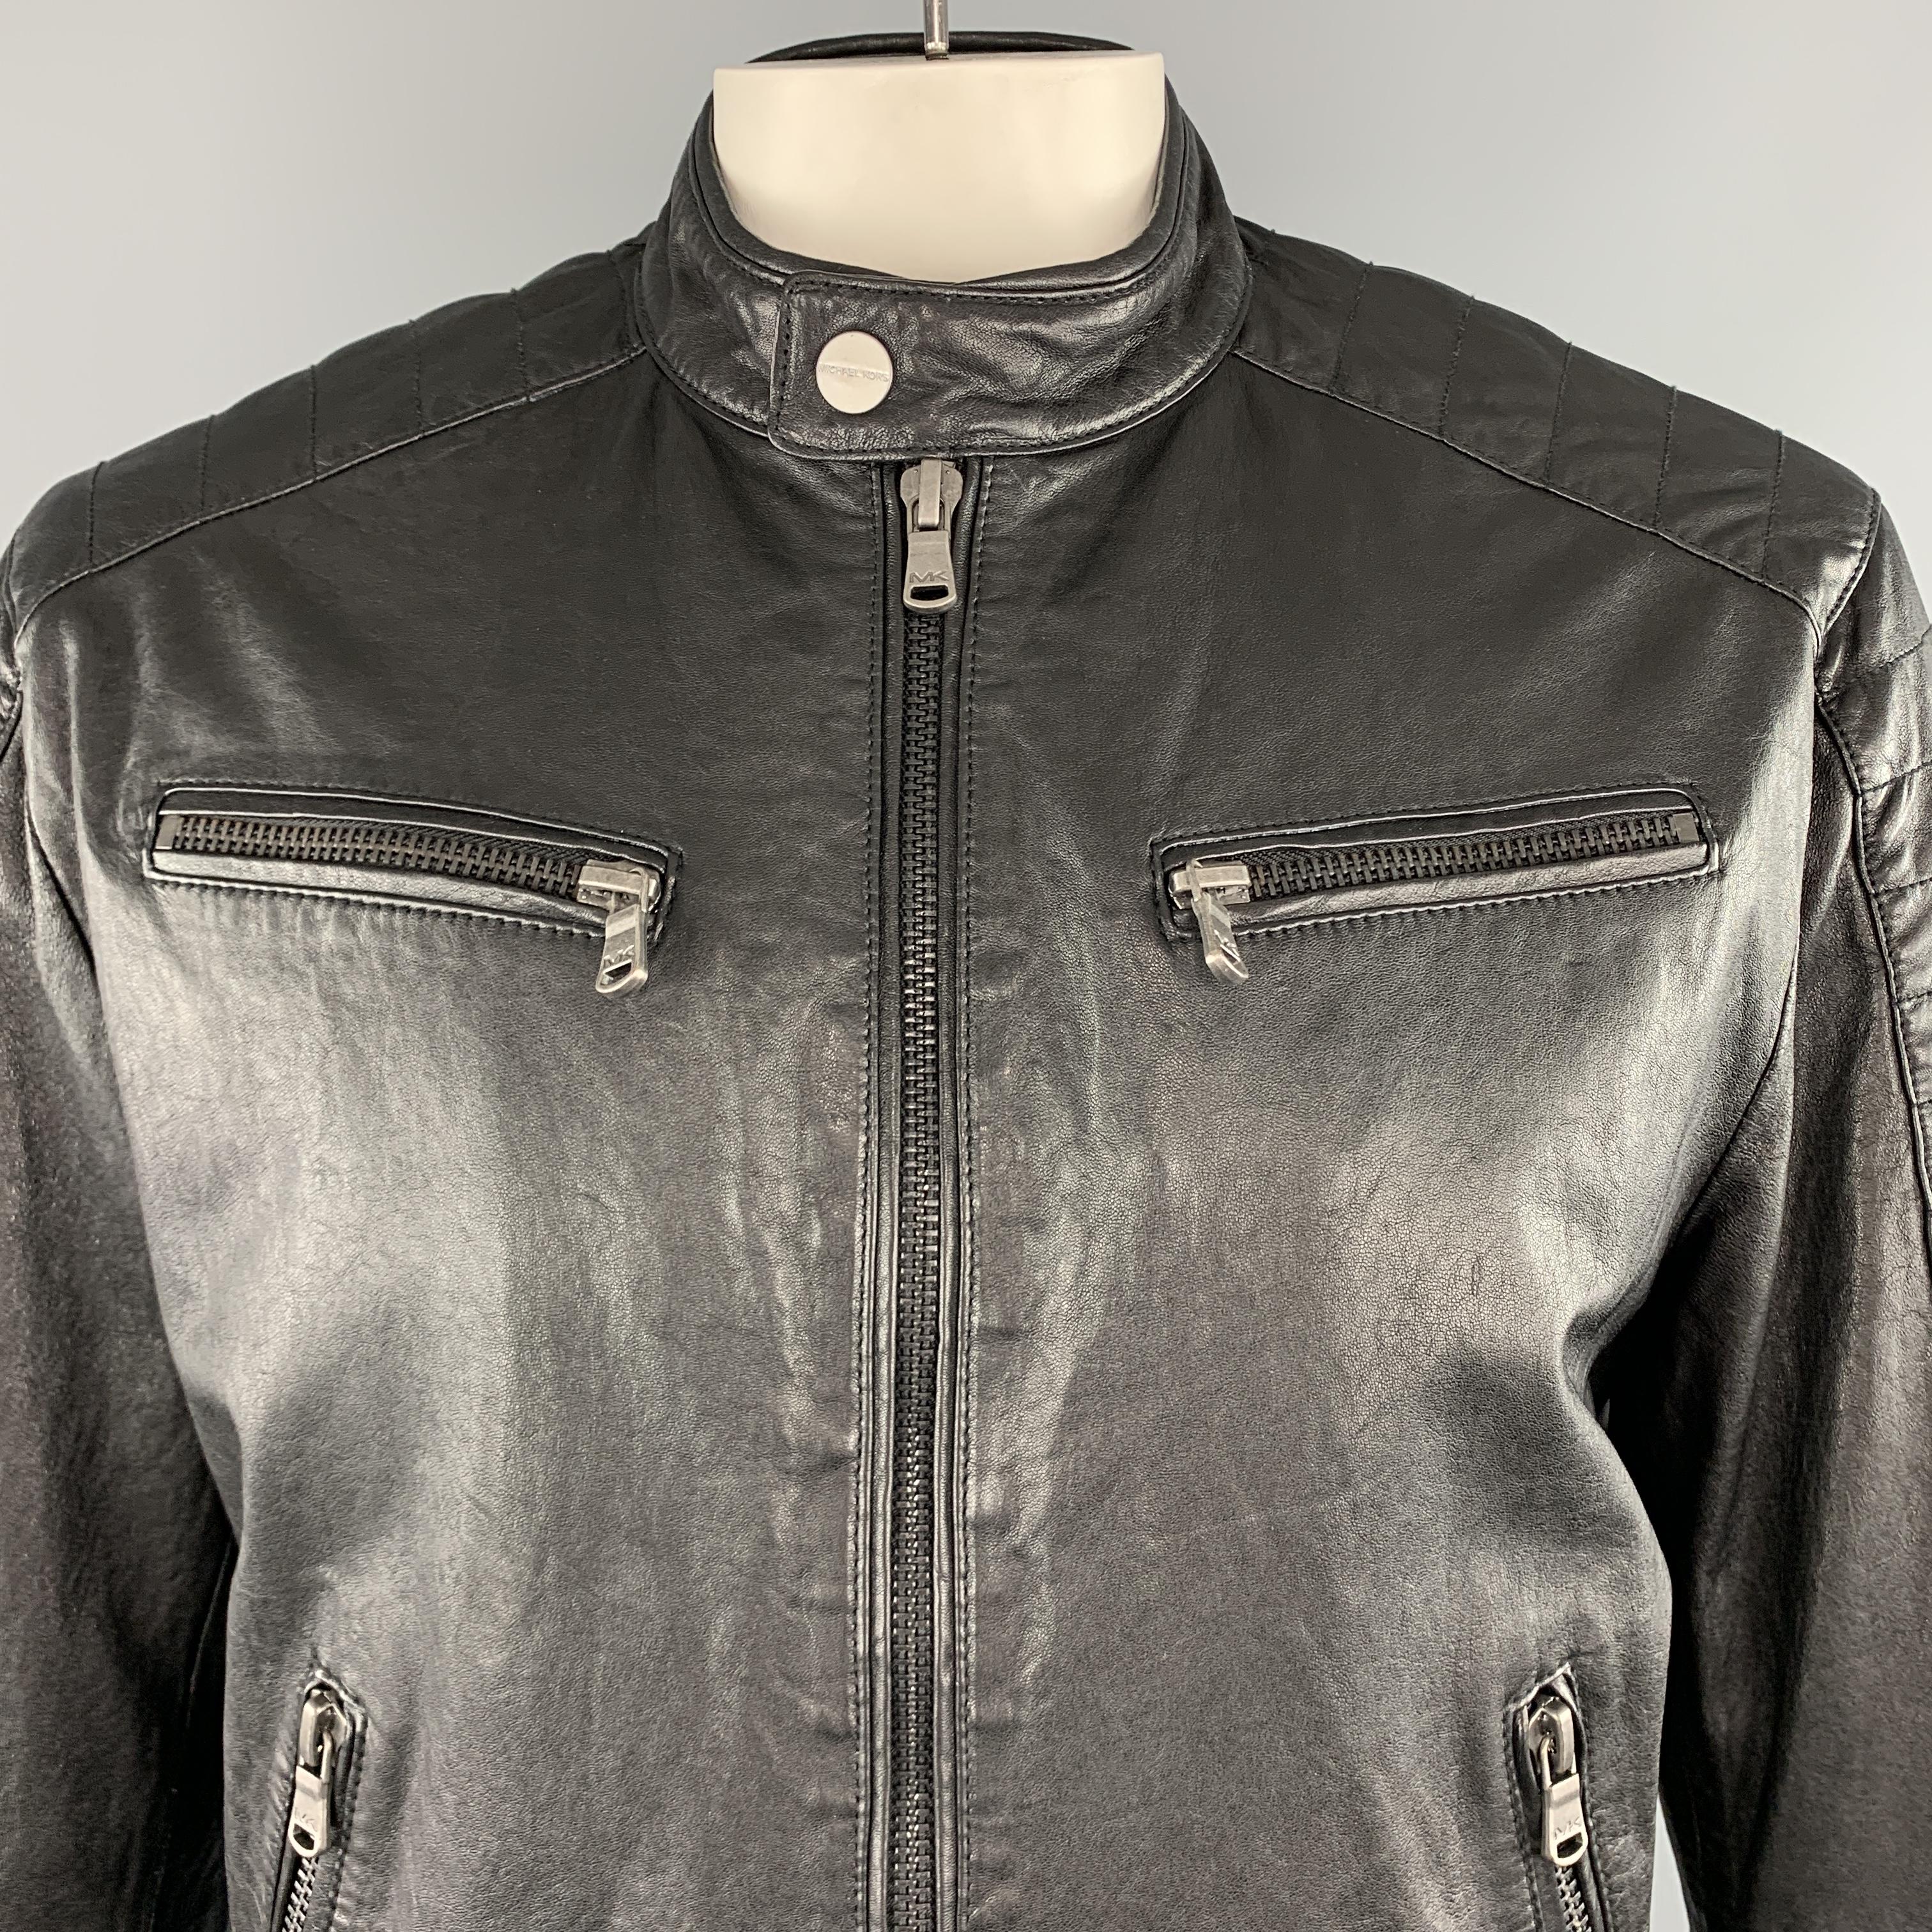 MICHAEL KORS biker jacket comes in black leather with a band snap collar, zip up front, four zip pockets, and quilted patches. 

Excellent Pre-Owned Condition.
Marked: XL

Measurements:

Shoulder: 18 in.
Chest: 48 in.
Sleeve: 26 in.
Length: 28 in.